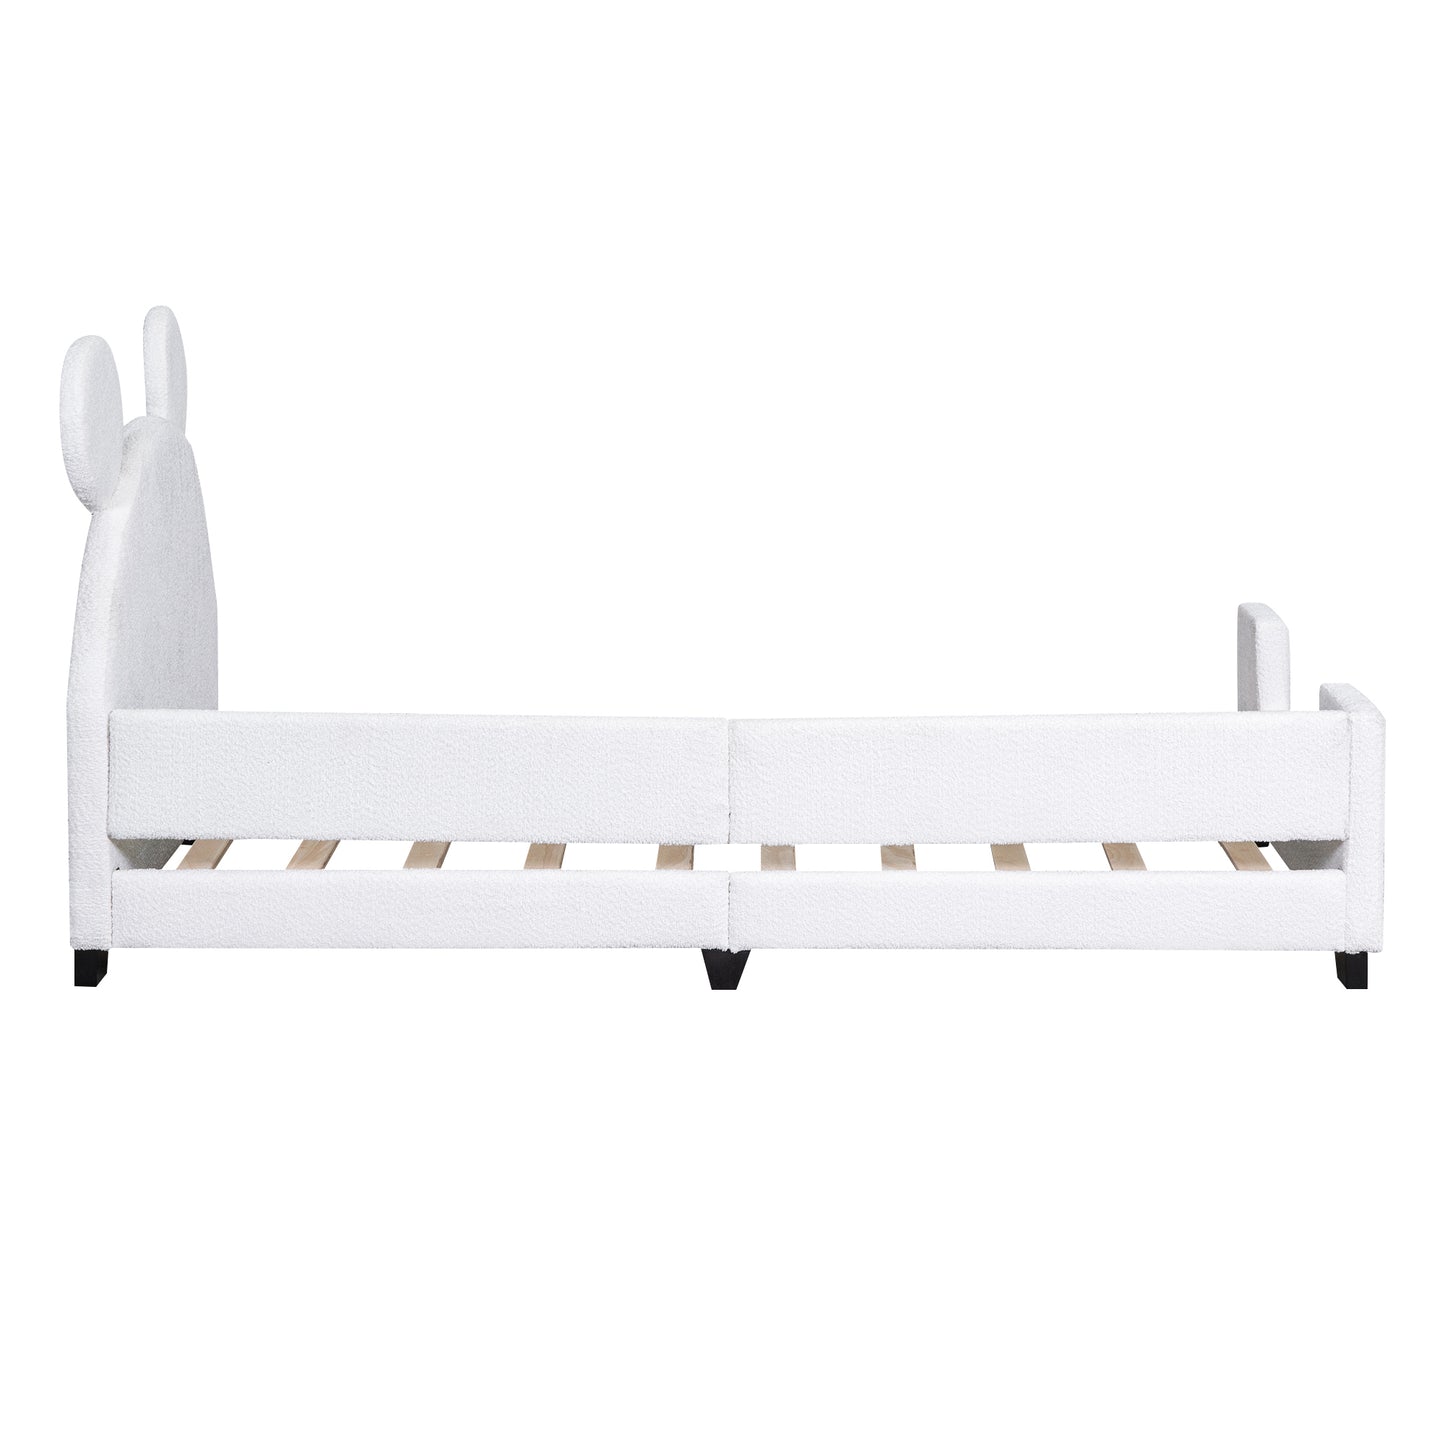 1st Choice Teddy Fleece Twin Daybed with Unique Headboard - Cozy and Stylish